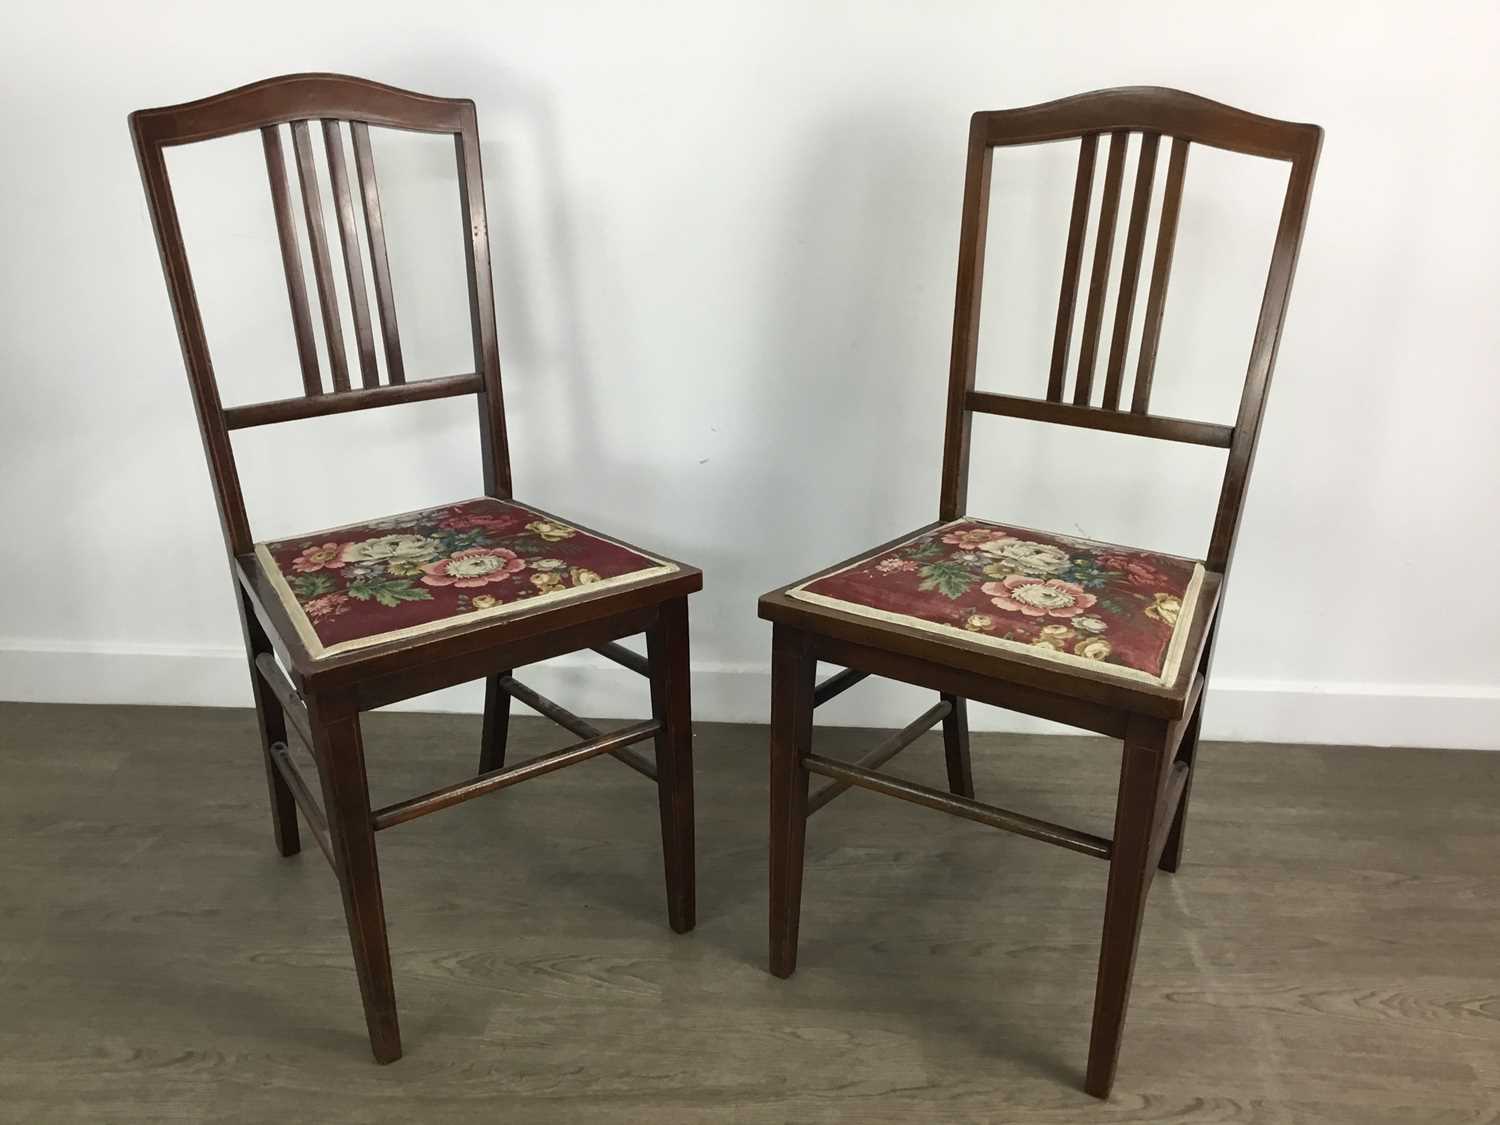 REPRODUCTION MAHOGANY CARVER CHAIR, AND A PAIR OF EDWARDIAN BEDROOM CHAIRS - Image 2 of 2